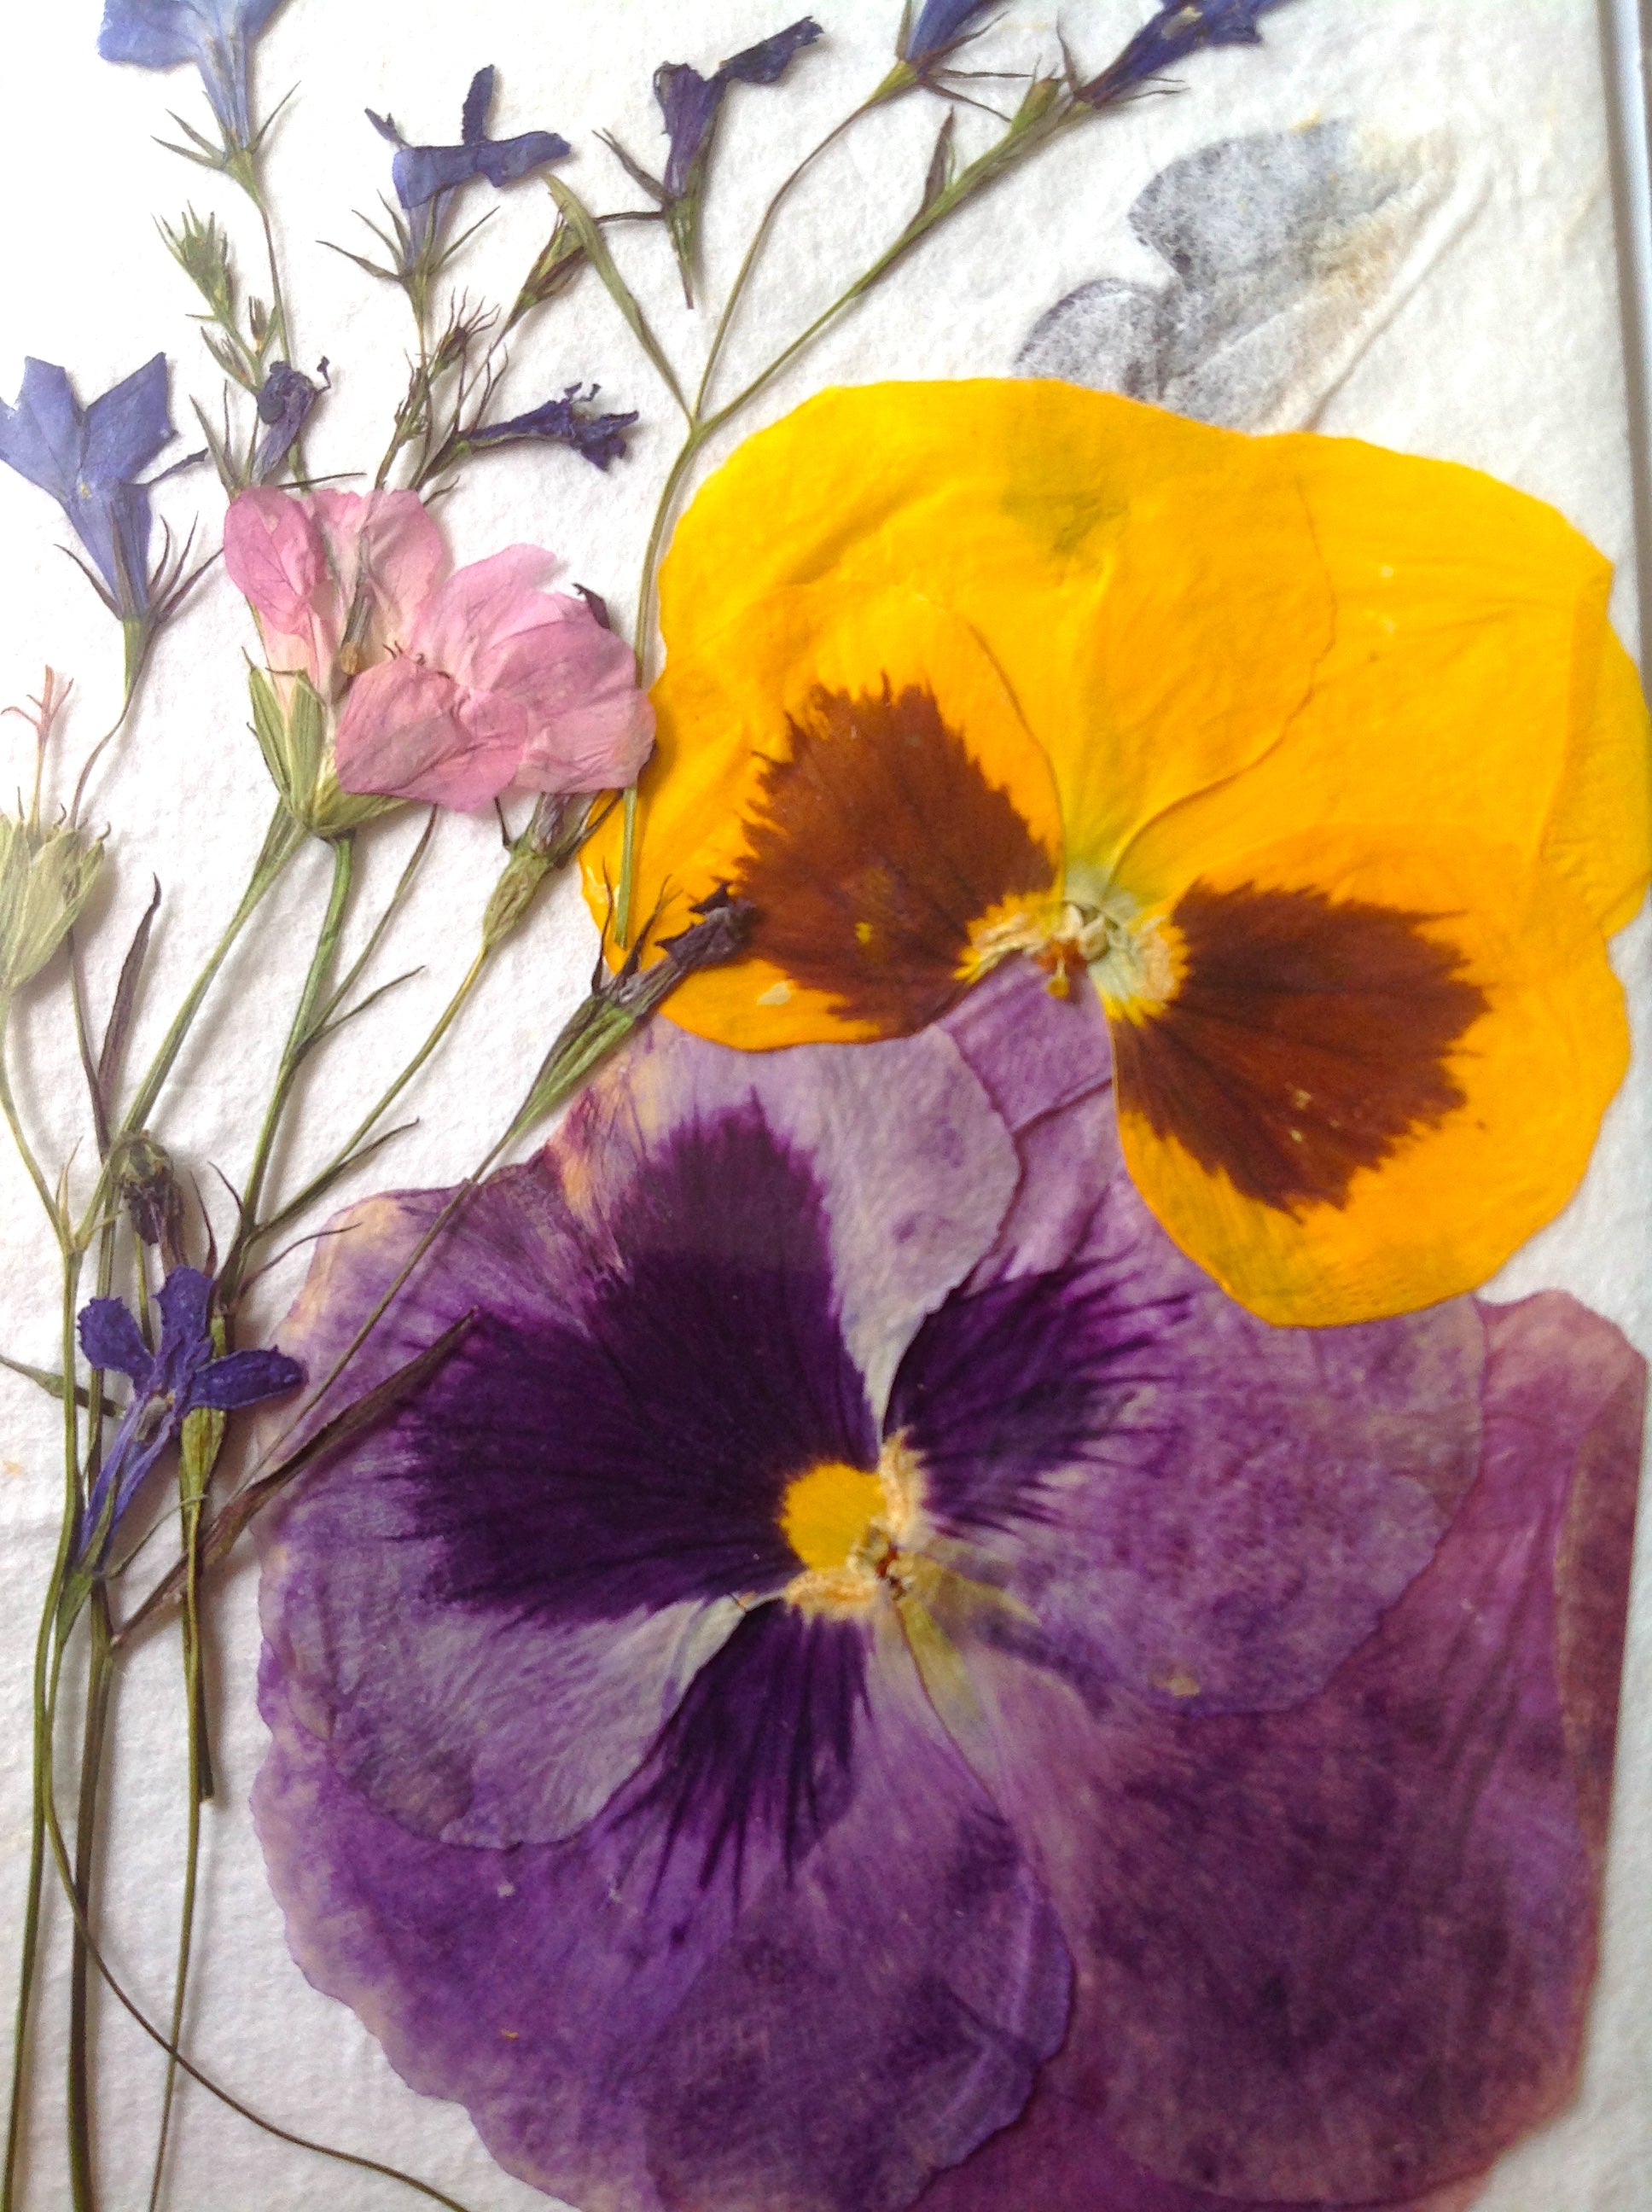 Pressed Flower Greeting Cards - Hand made